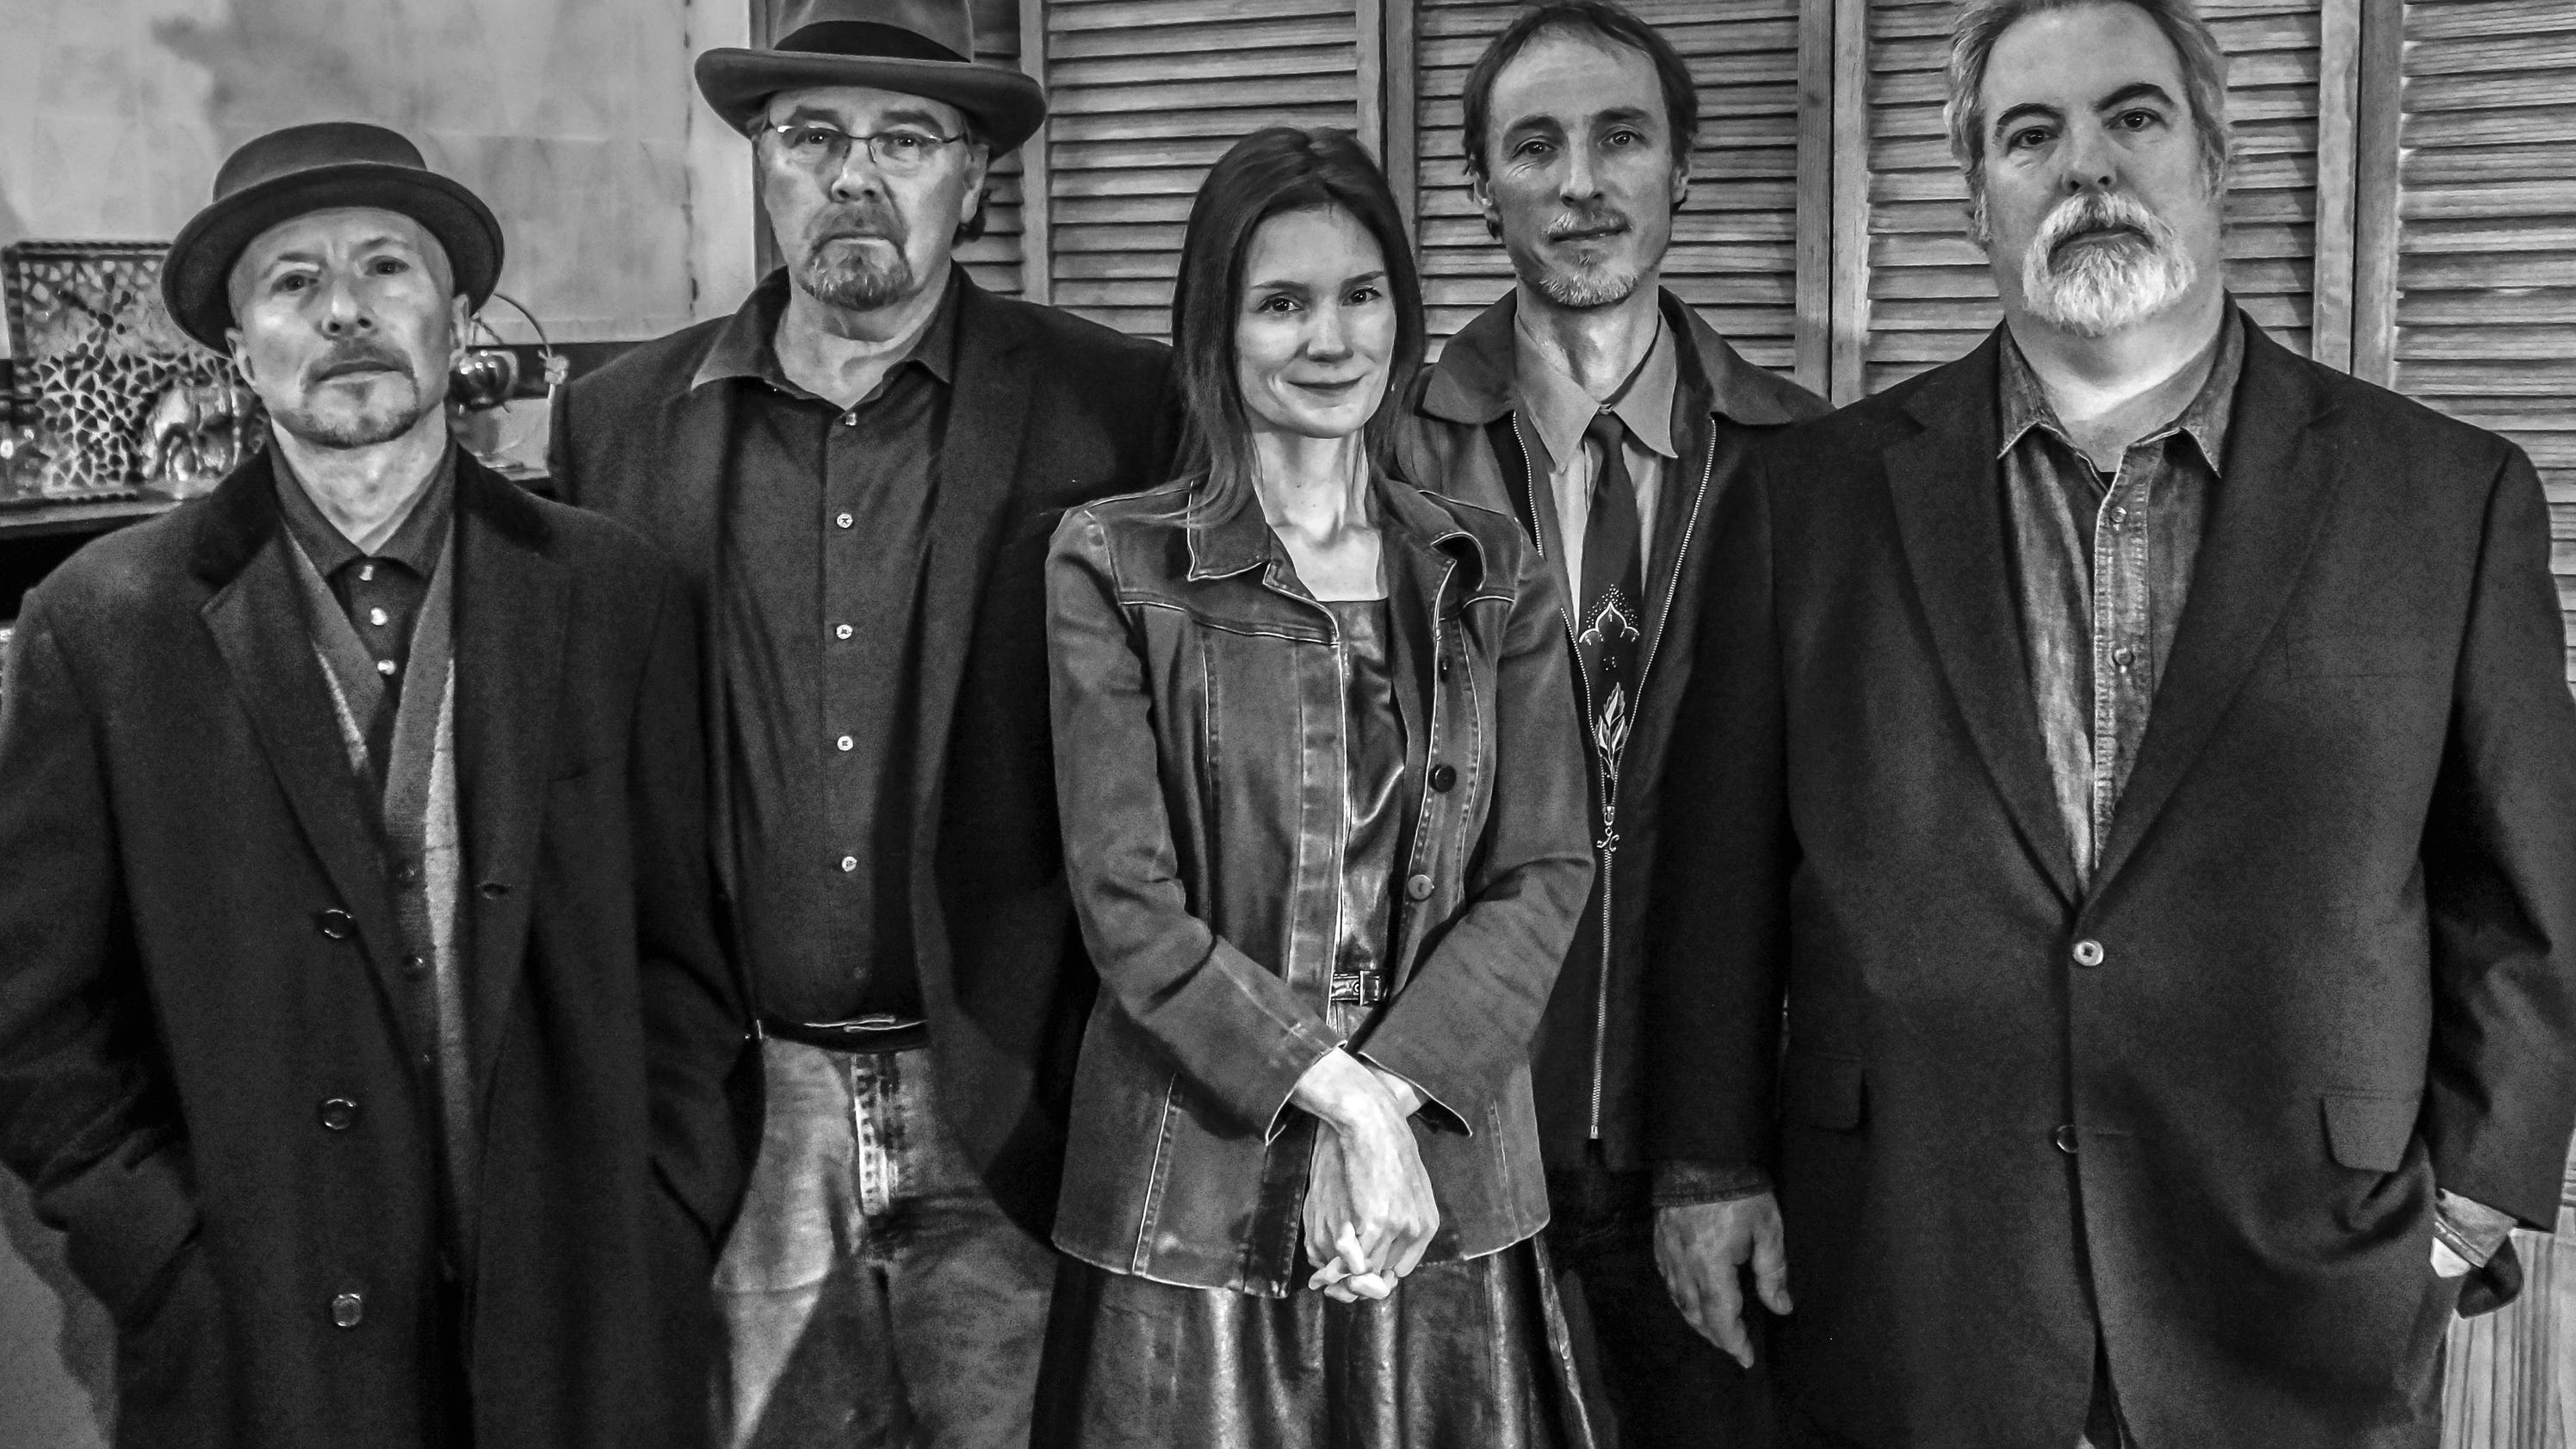 10,000 Maniacs still inspired to tour, create new music